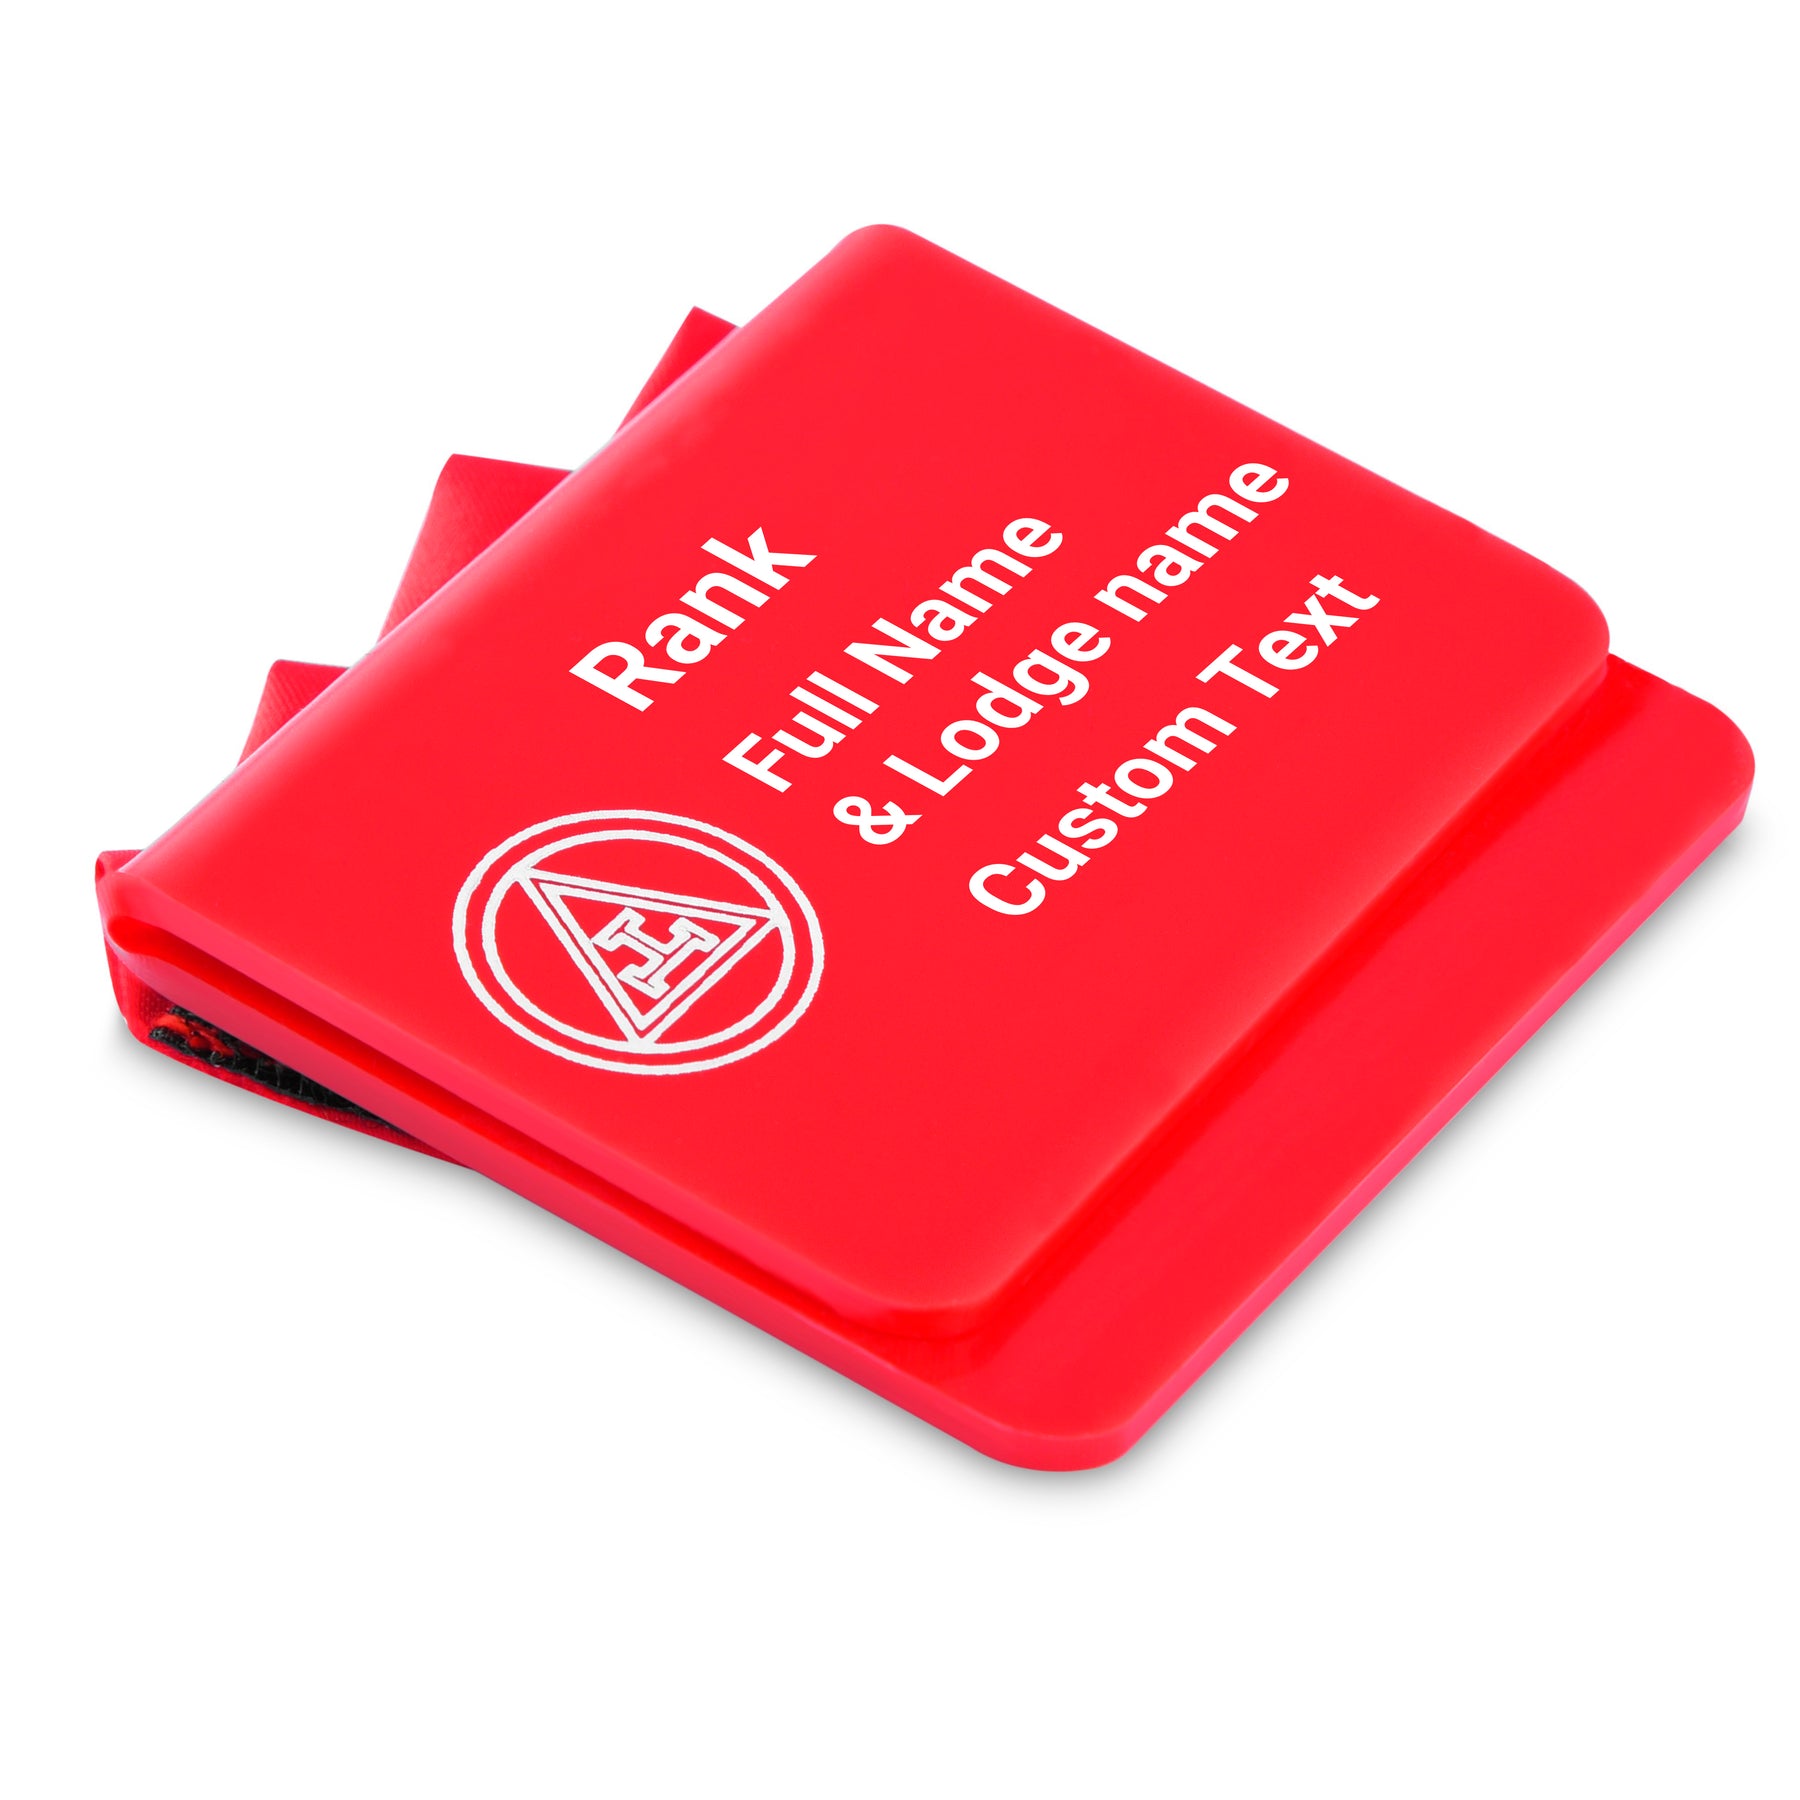 Royal Arch Chapter Pocket Square - Red Plastic Fabric Customizable